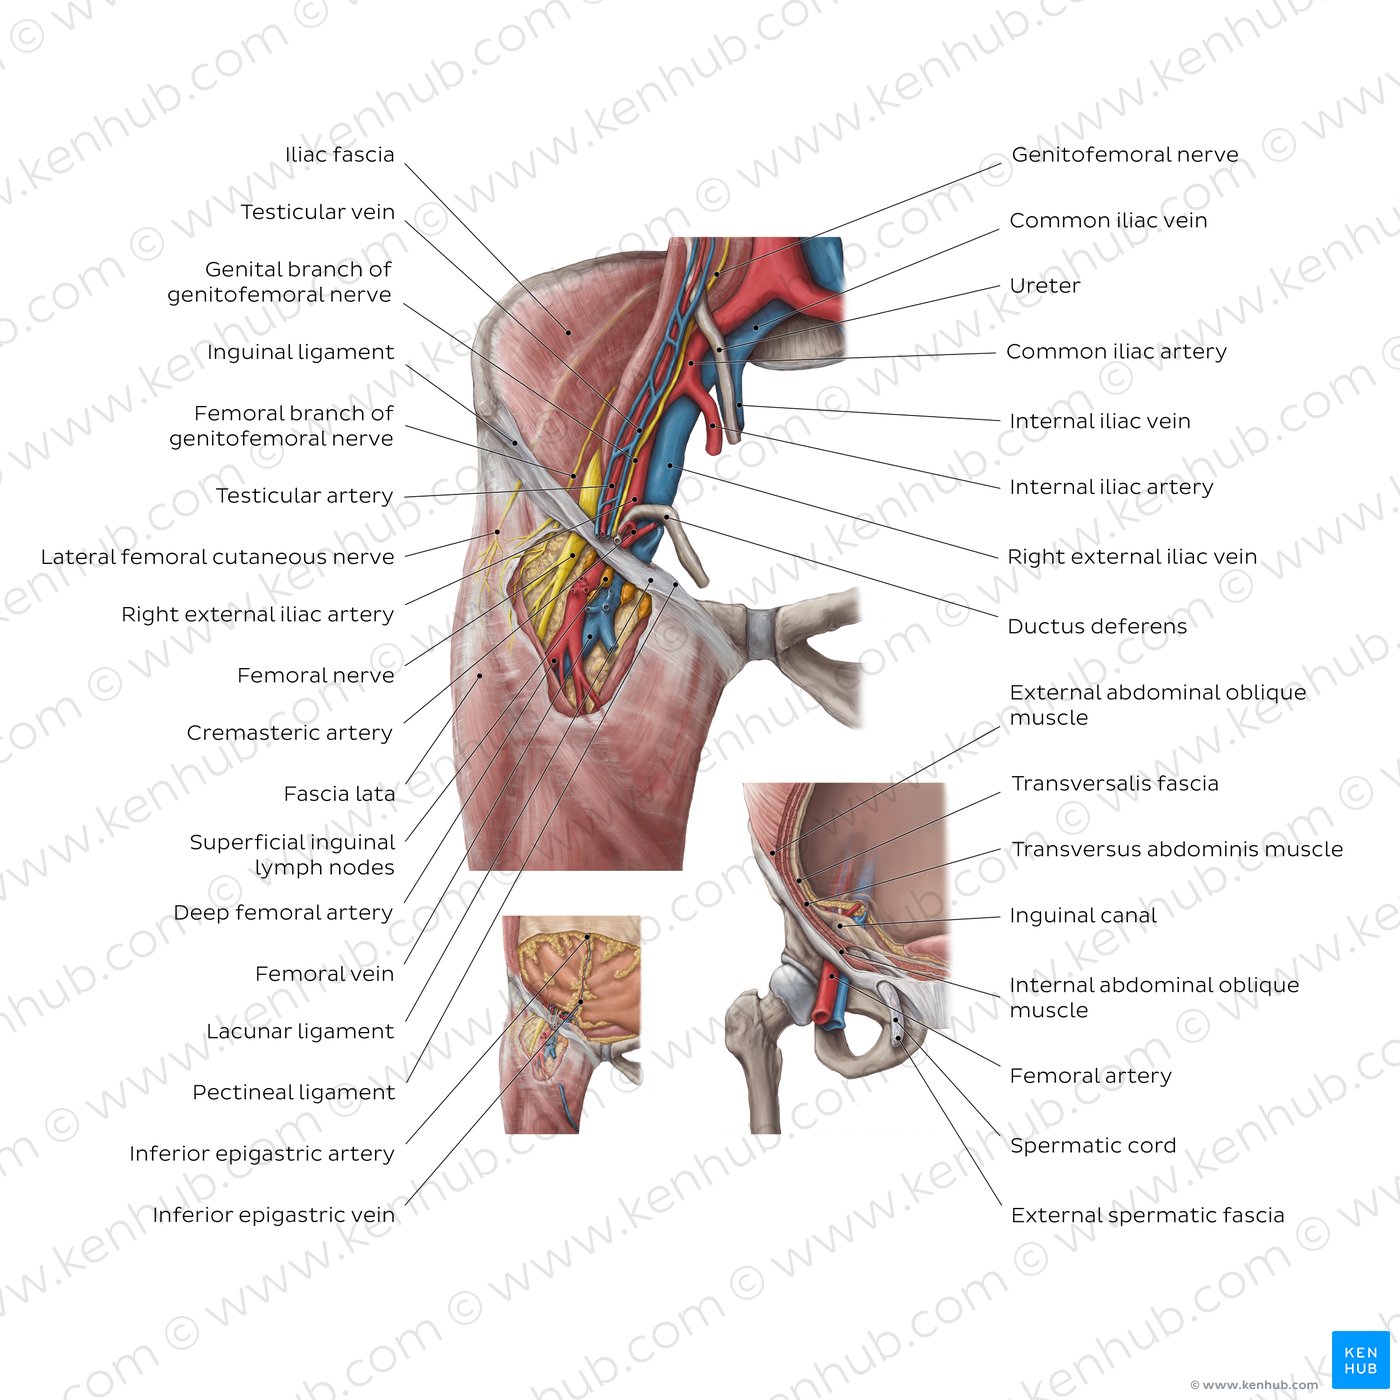 Inguinal canal: Overview